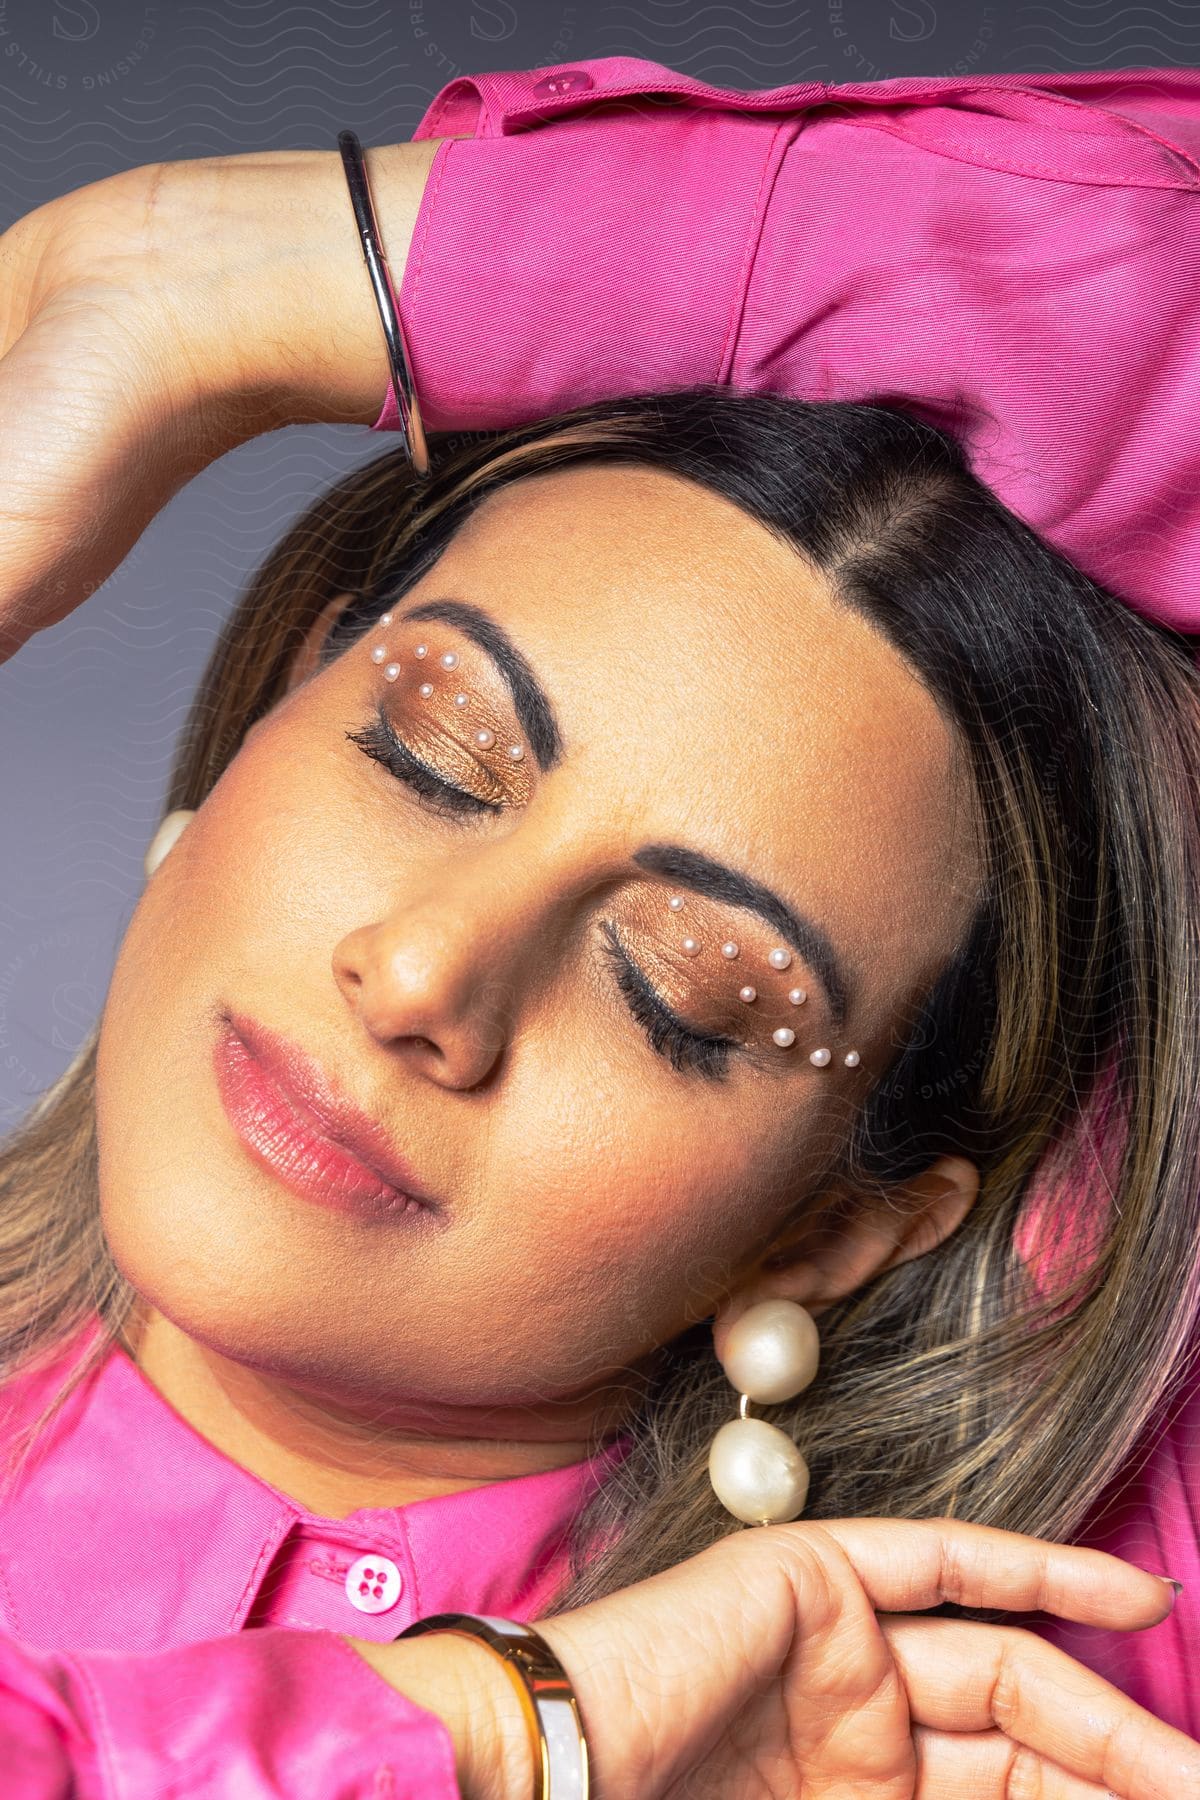 A woman in a pink shirt posing with eyes closed and pearls stuck to her eyelids.